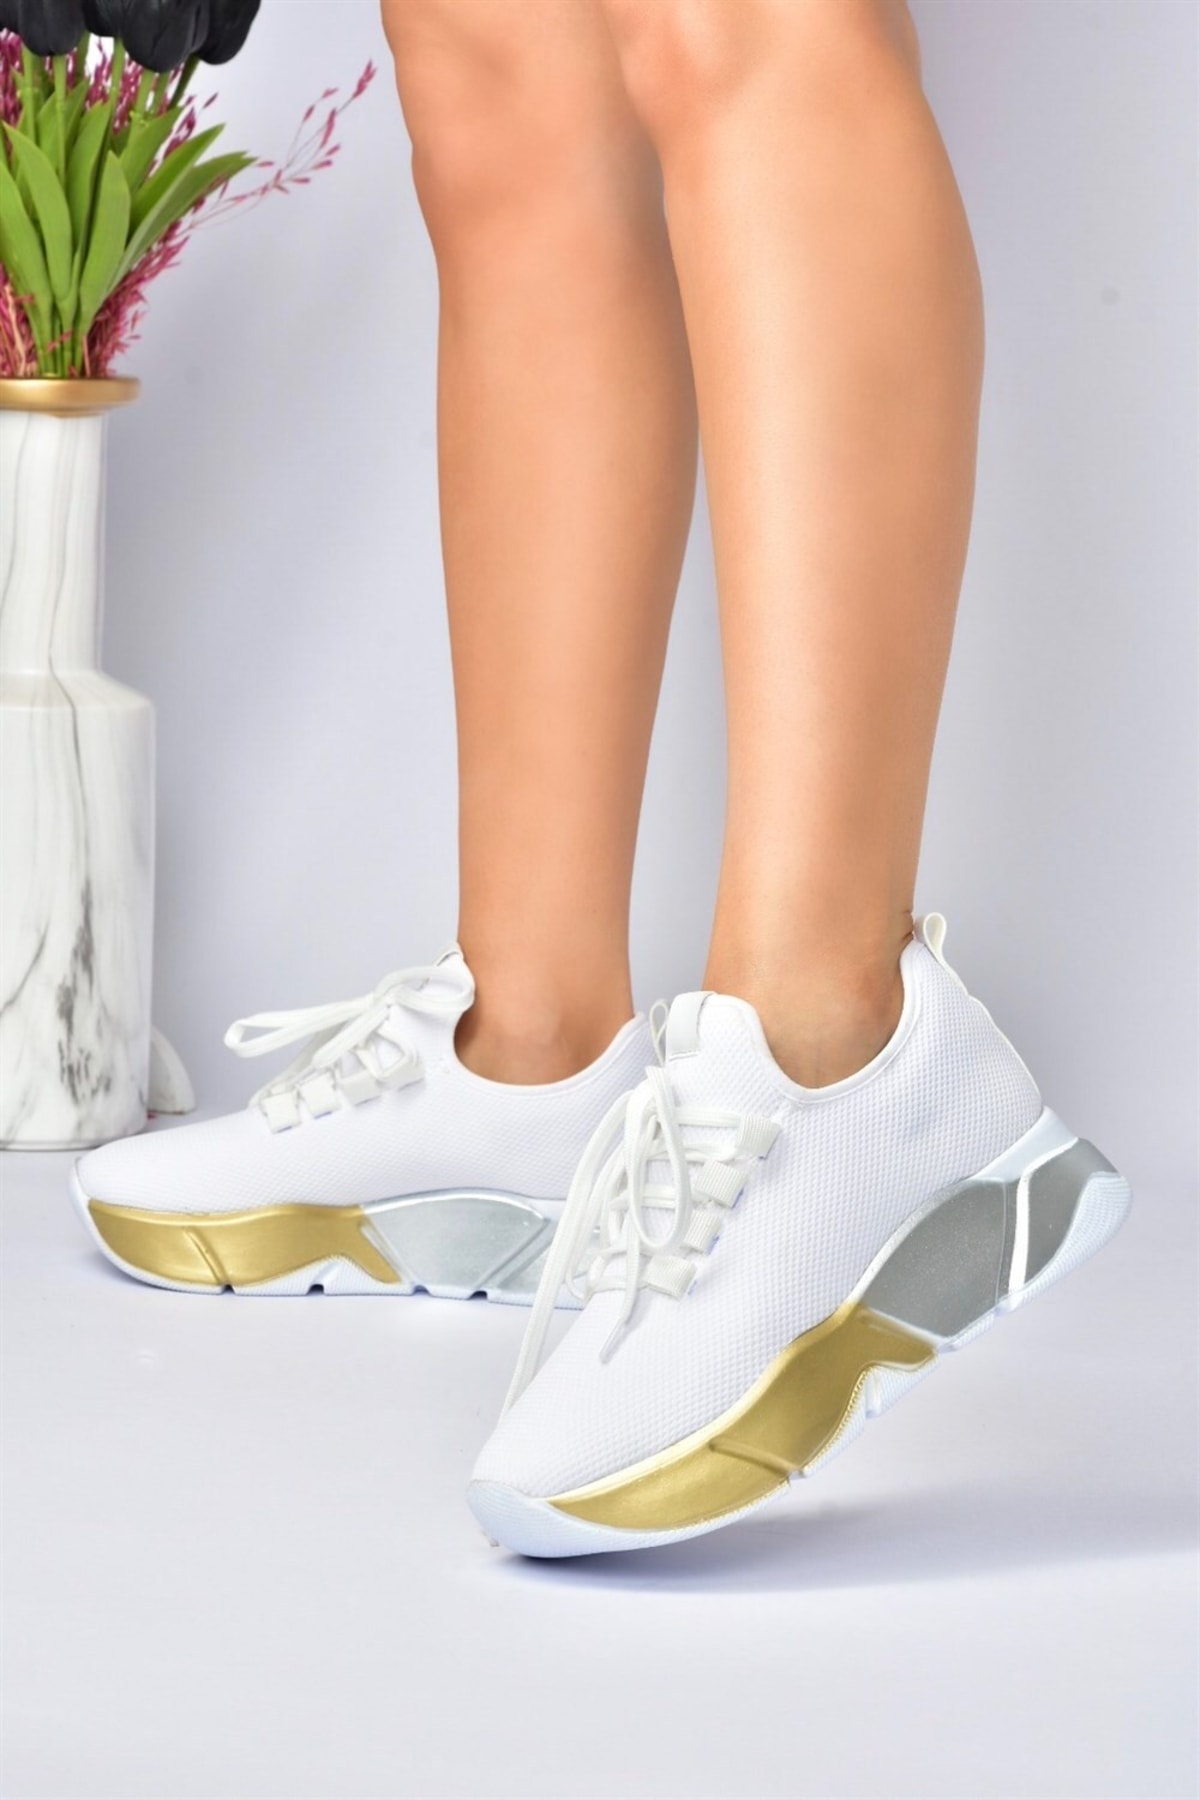 Fox Shoes White/gold Fabric Thick Sole Women's Sneakers Sports Shoes